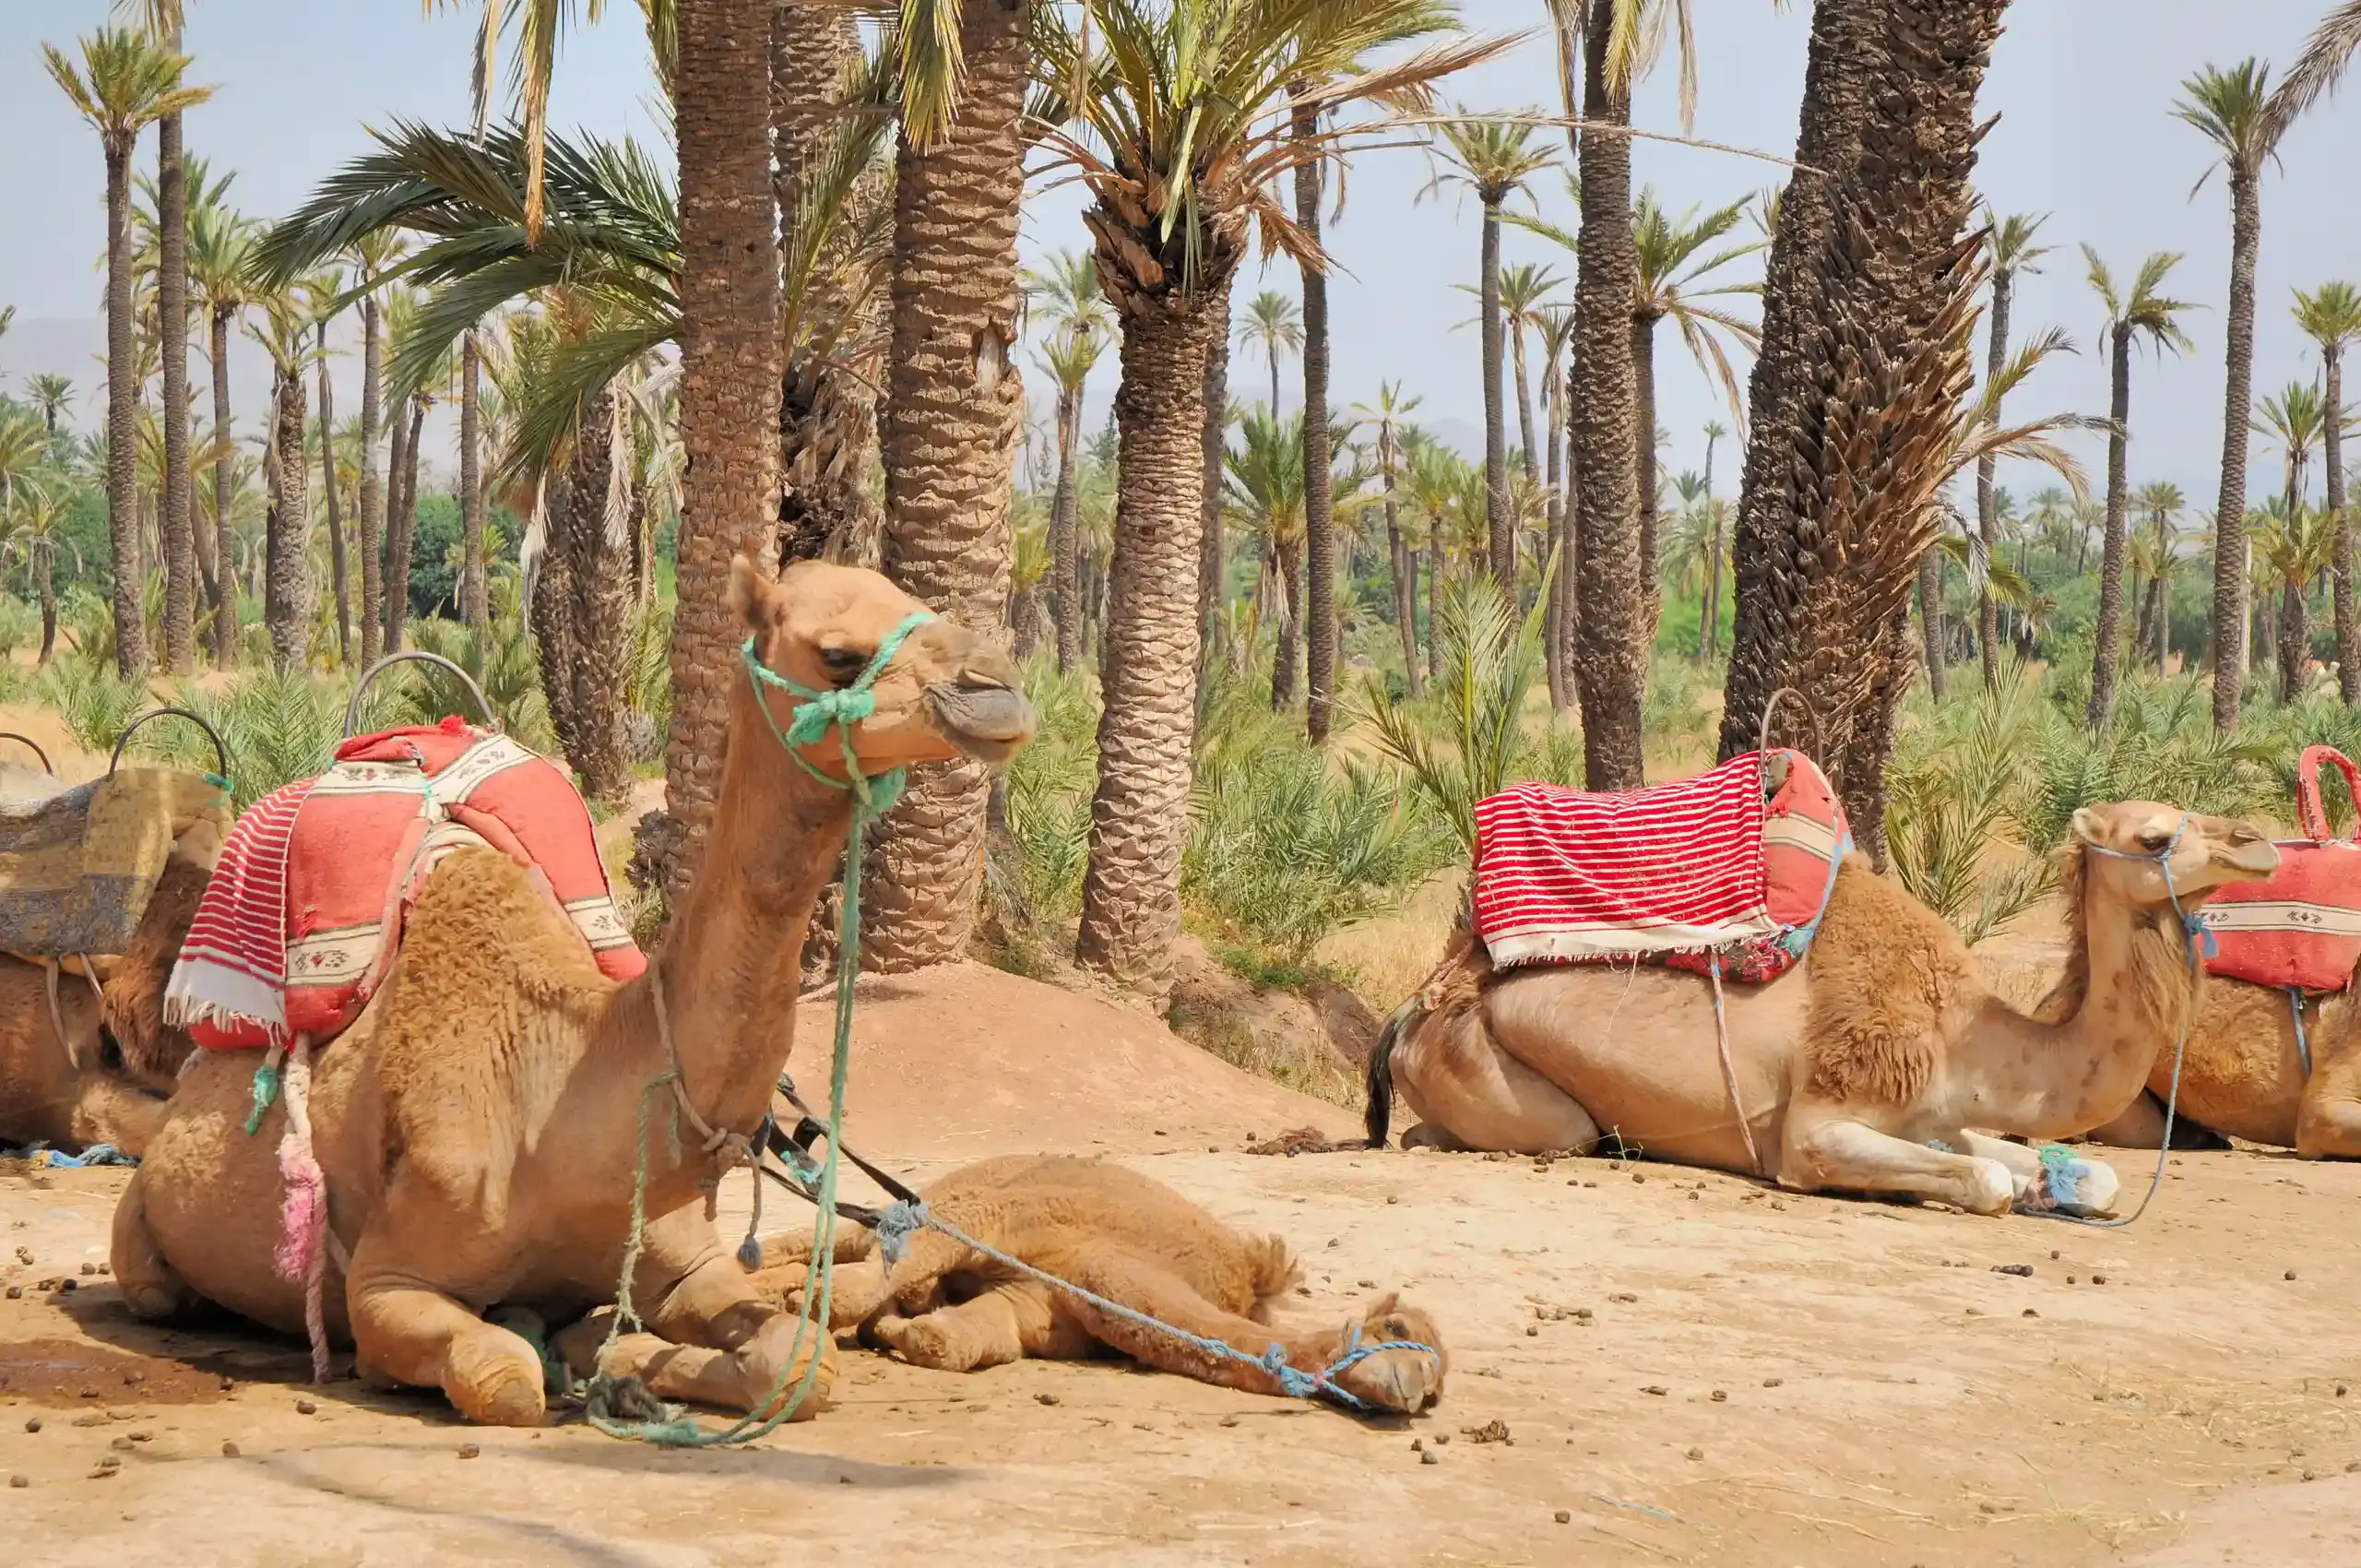 Camel ride in Marrakech, a must-try activity that will enhance your stay in our guesthouse.